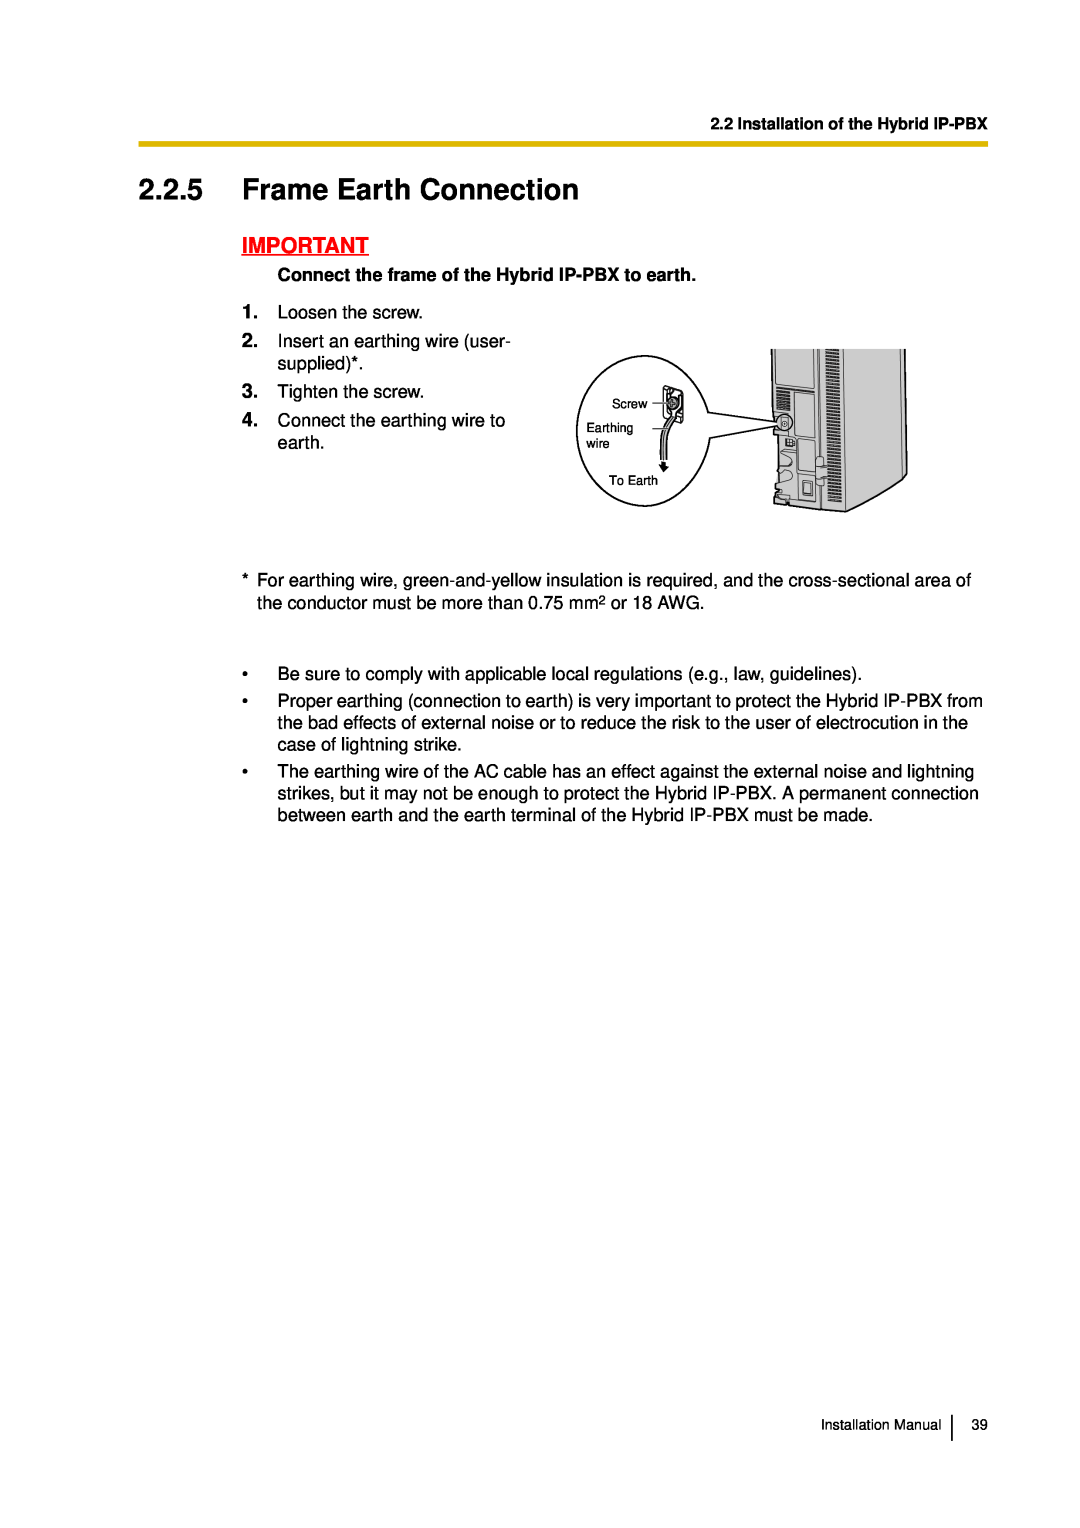 Panasonic KX-TDA30 installation manual 2.2.5Frame Earth Connection, Connect the frame of the Hybrid IP-PBXto earth 